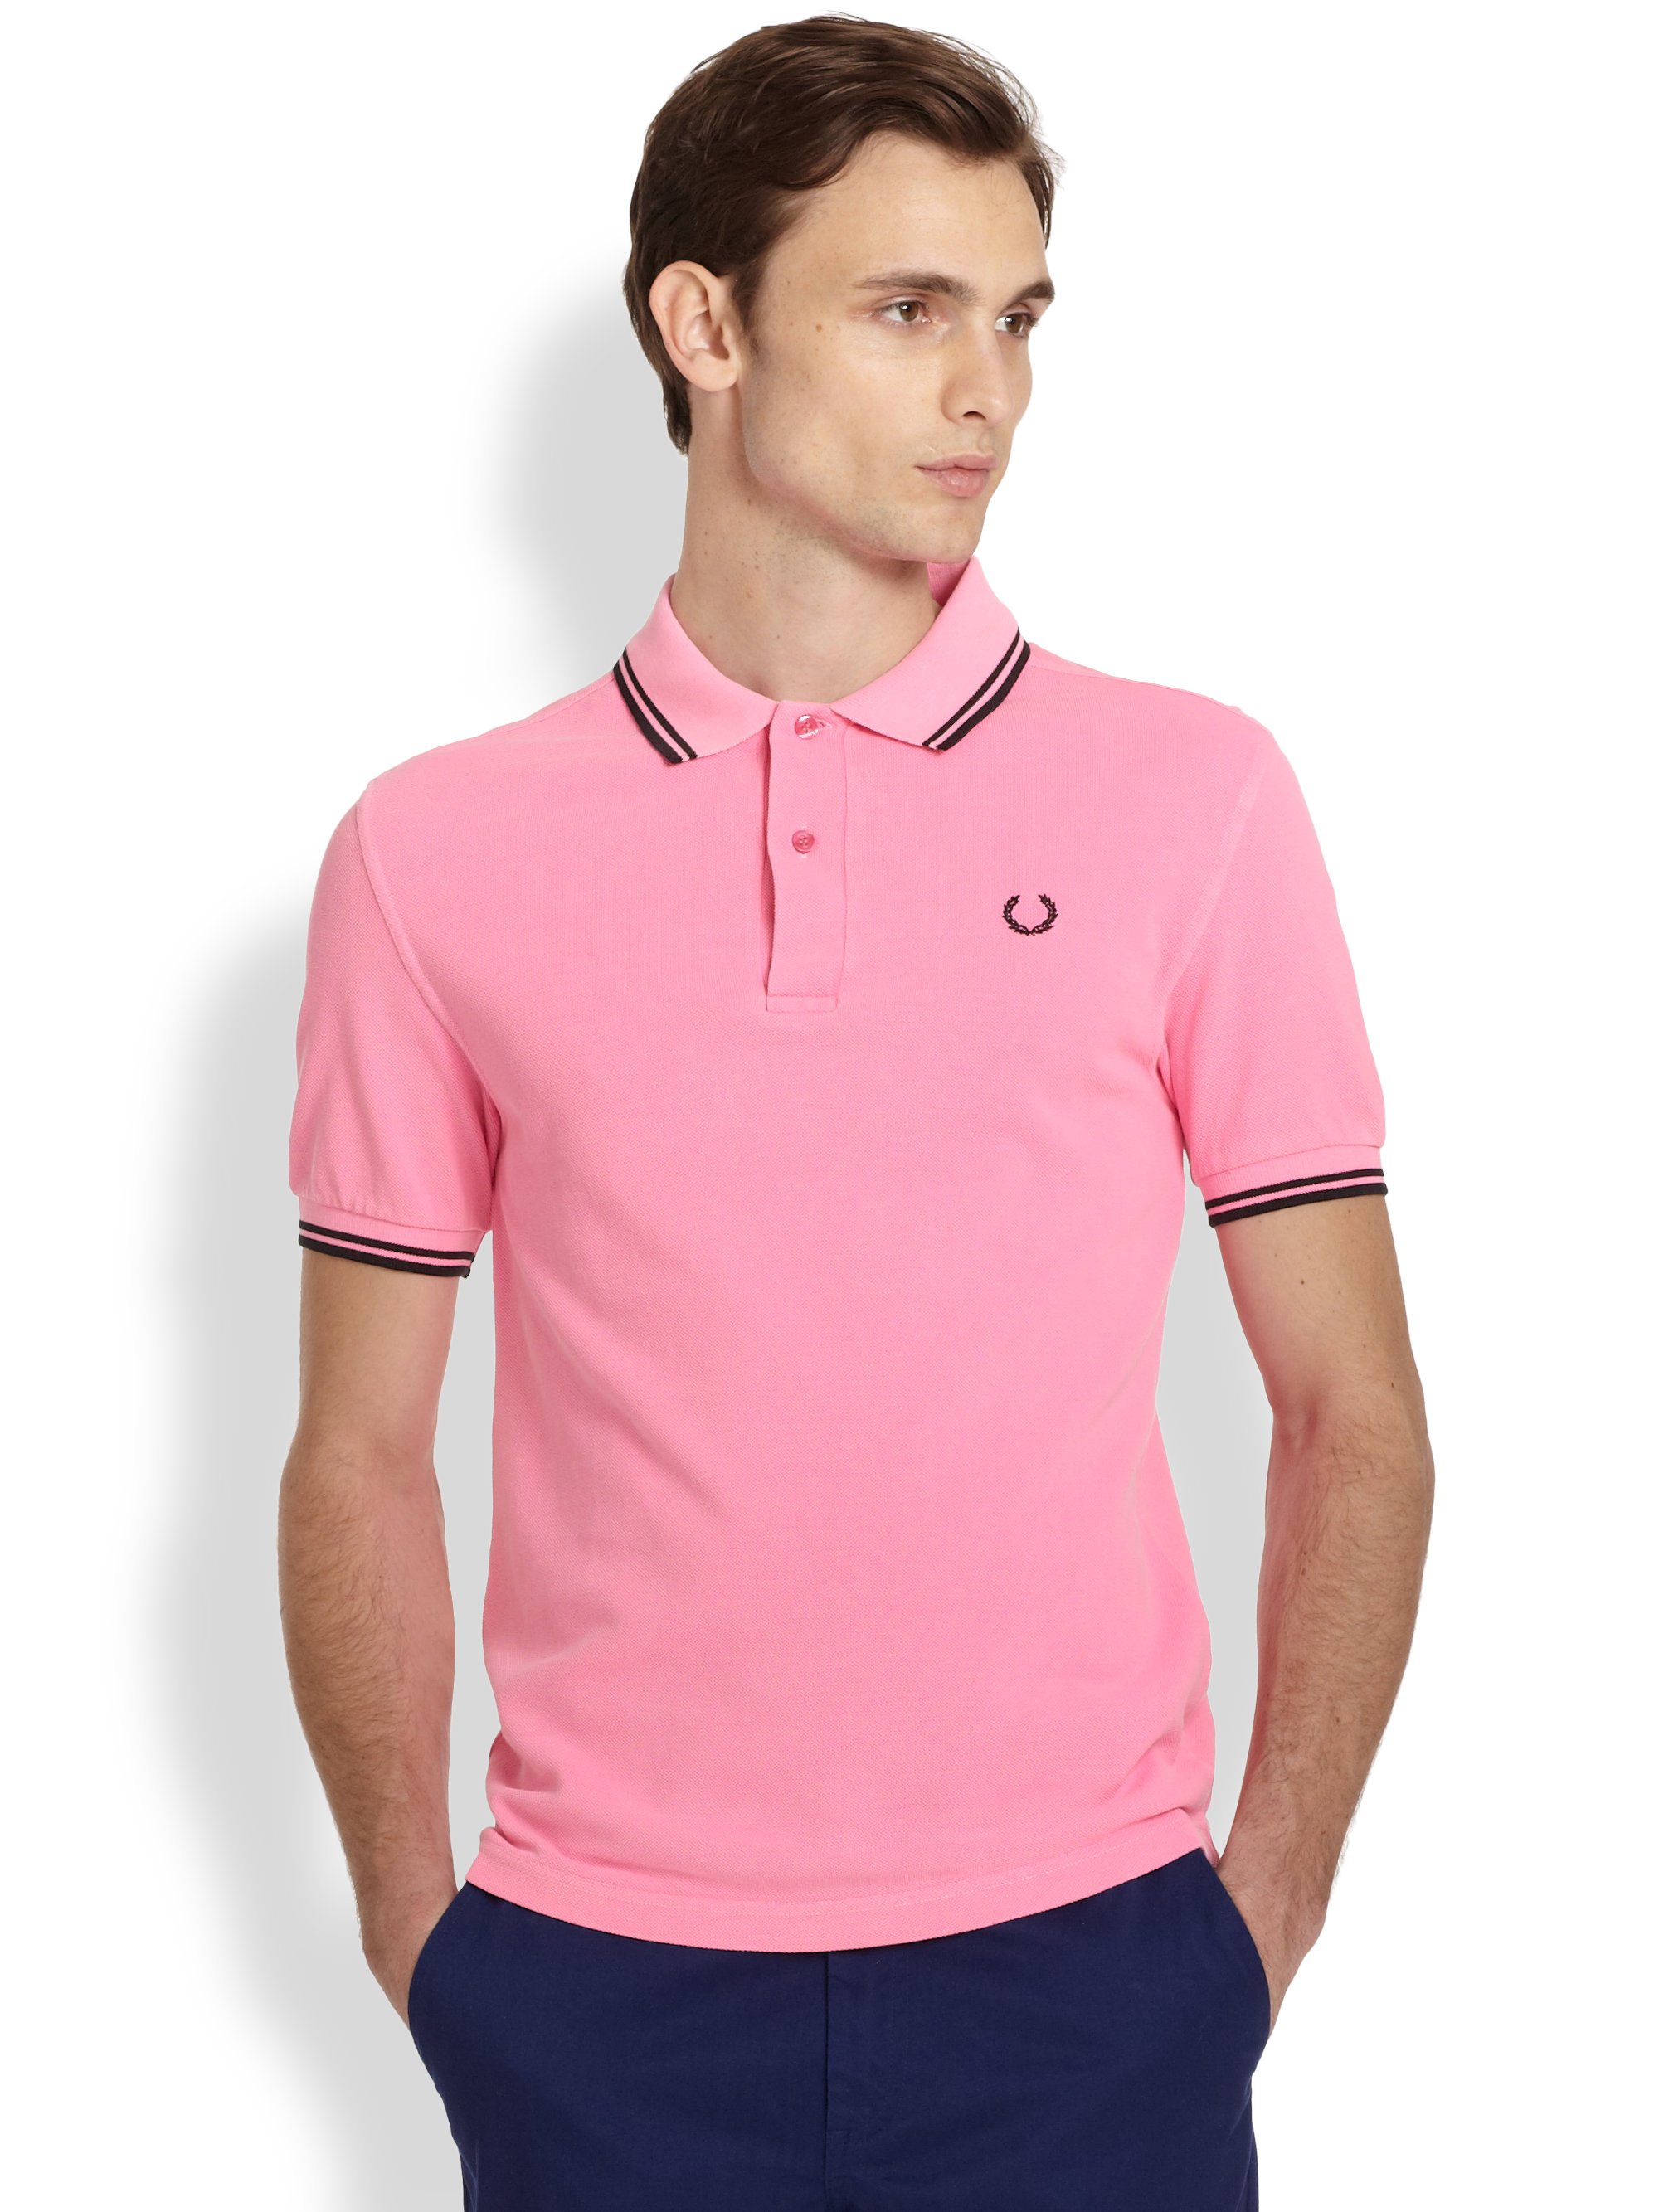 Fred Perry Acid Hue Polo In Acid Pink Pink For Men Lyst 